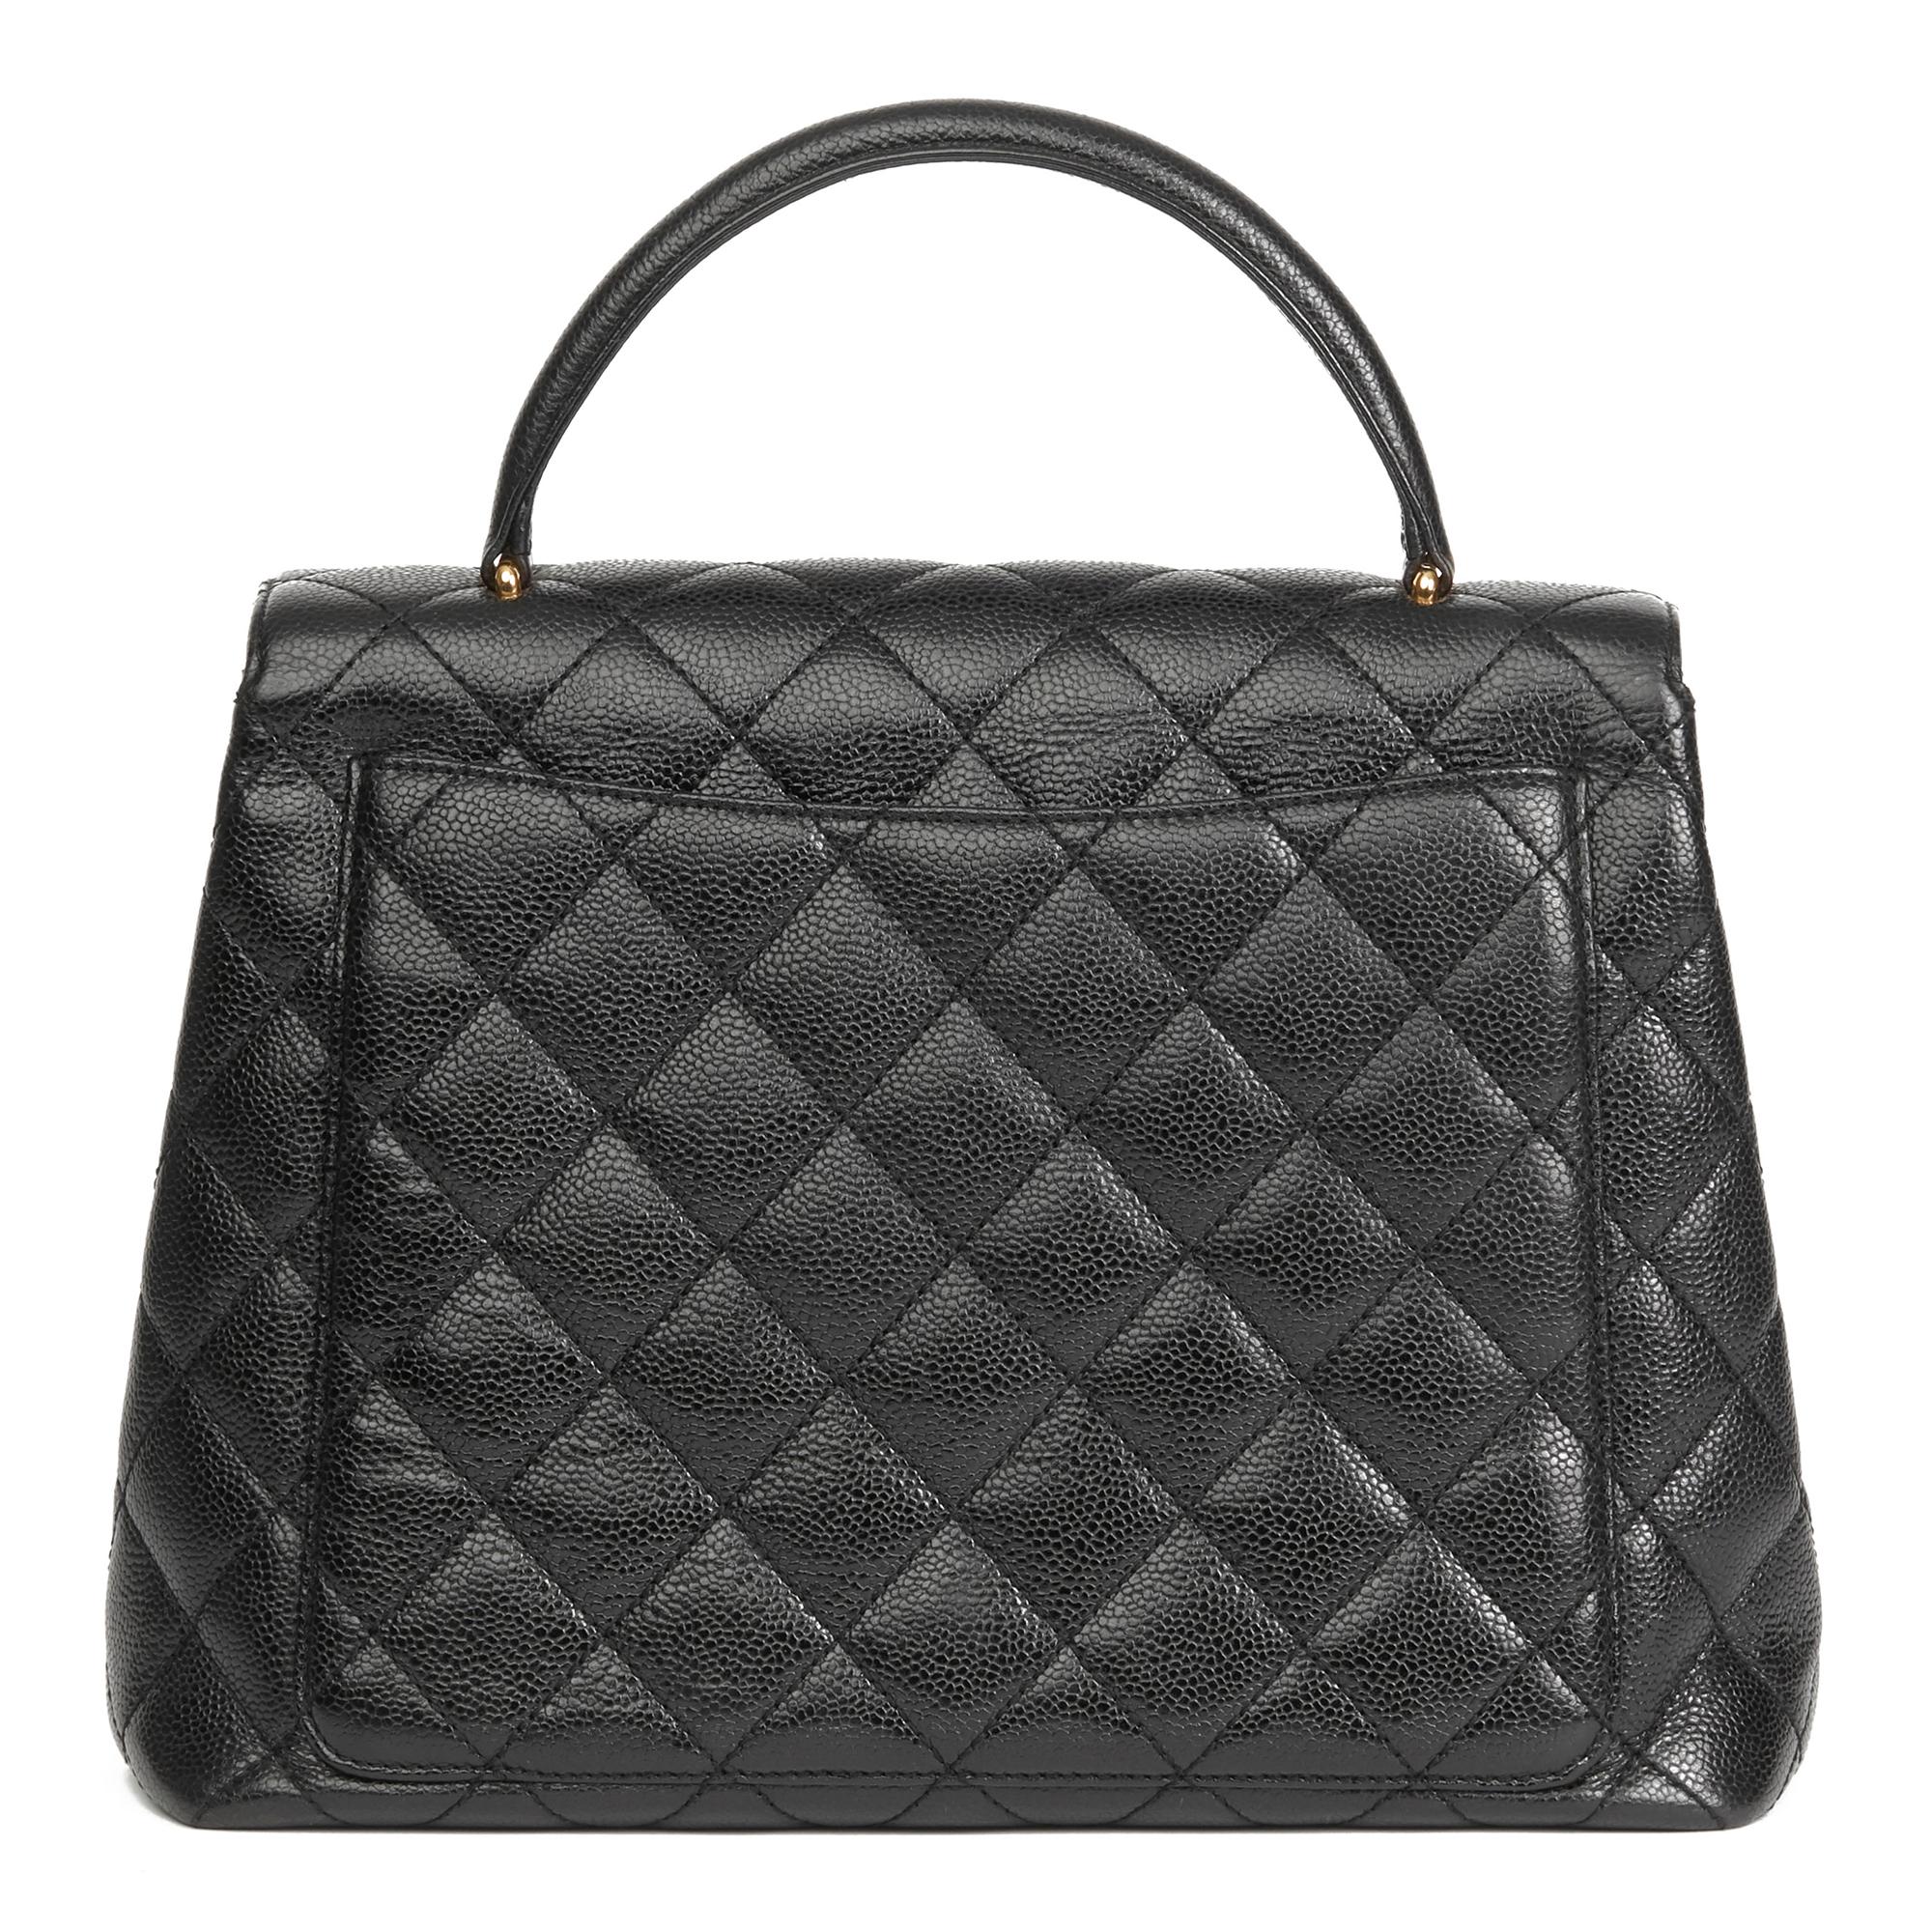 Women's 2002 Chanel Black Quilted Caviar Leather Timeless Kelly